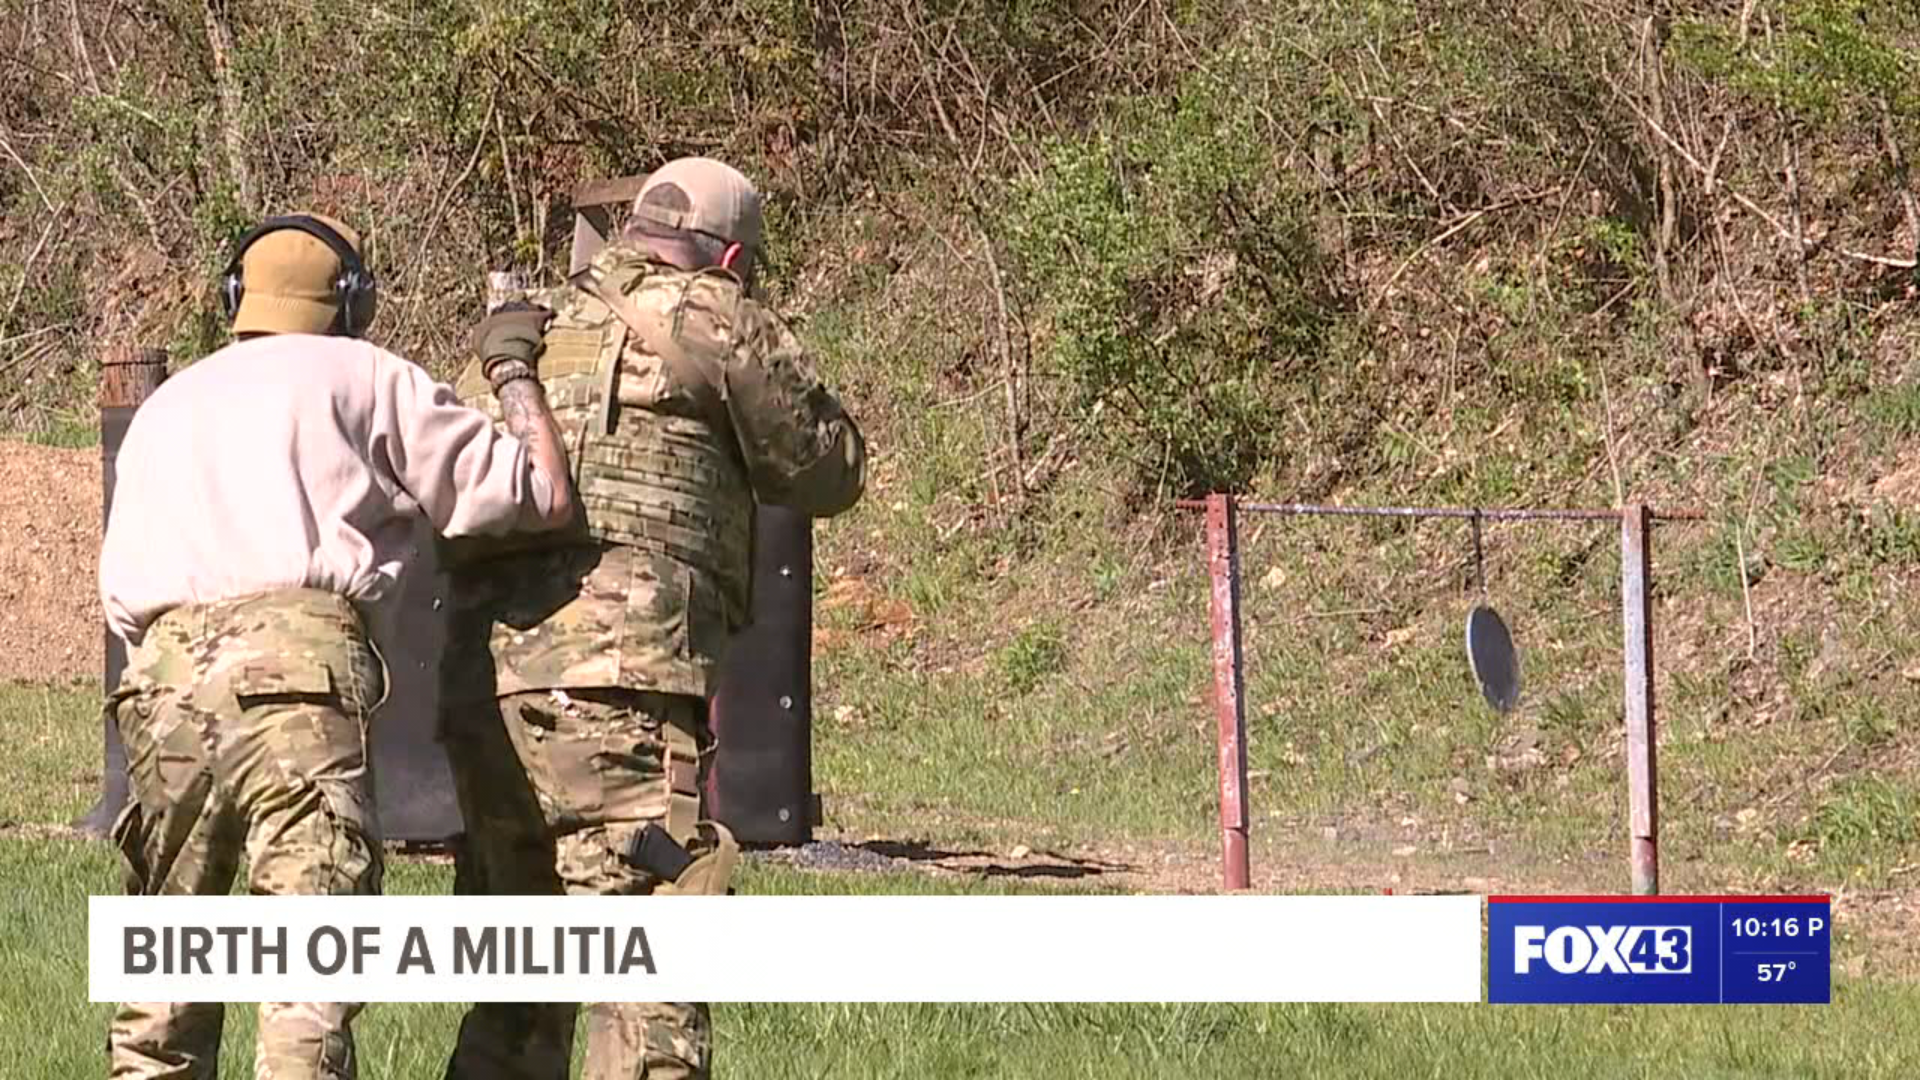 Militias are controversial groups of privately armed citizens that rarely give an inside view of their operations. One Pa. militia agreed to discuss their mission.